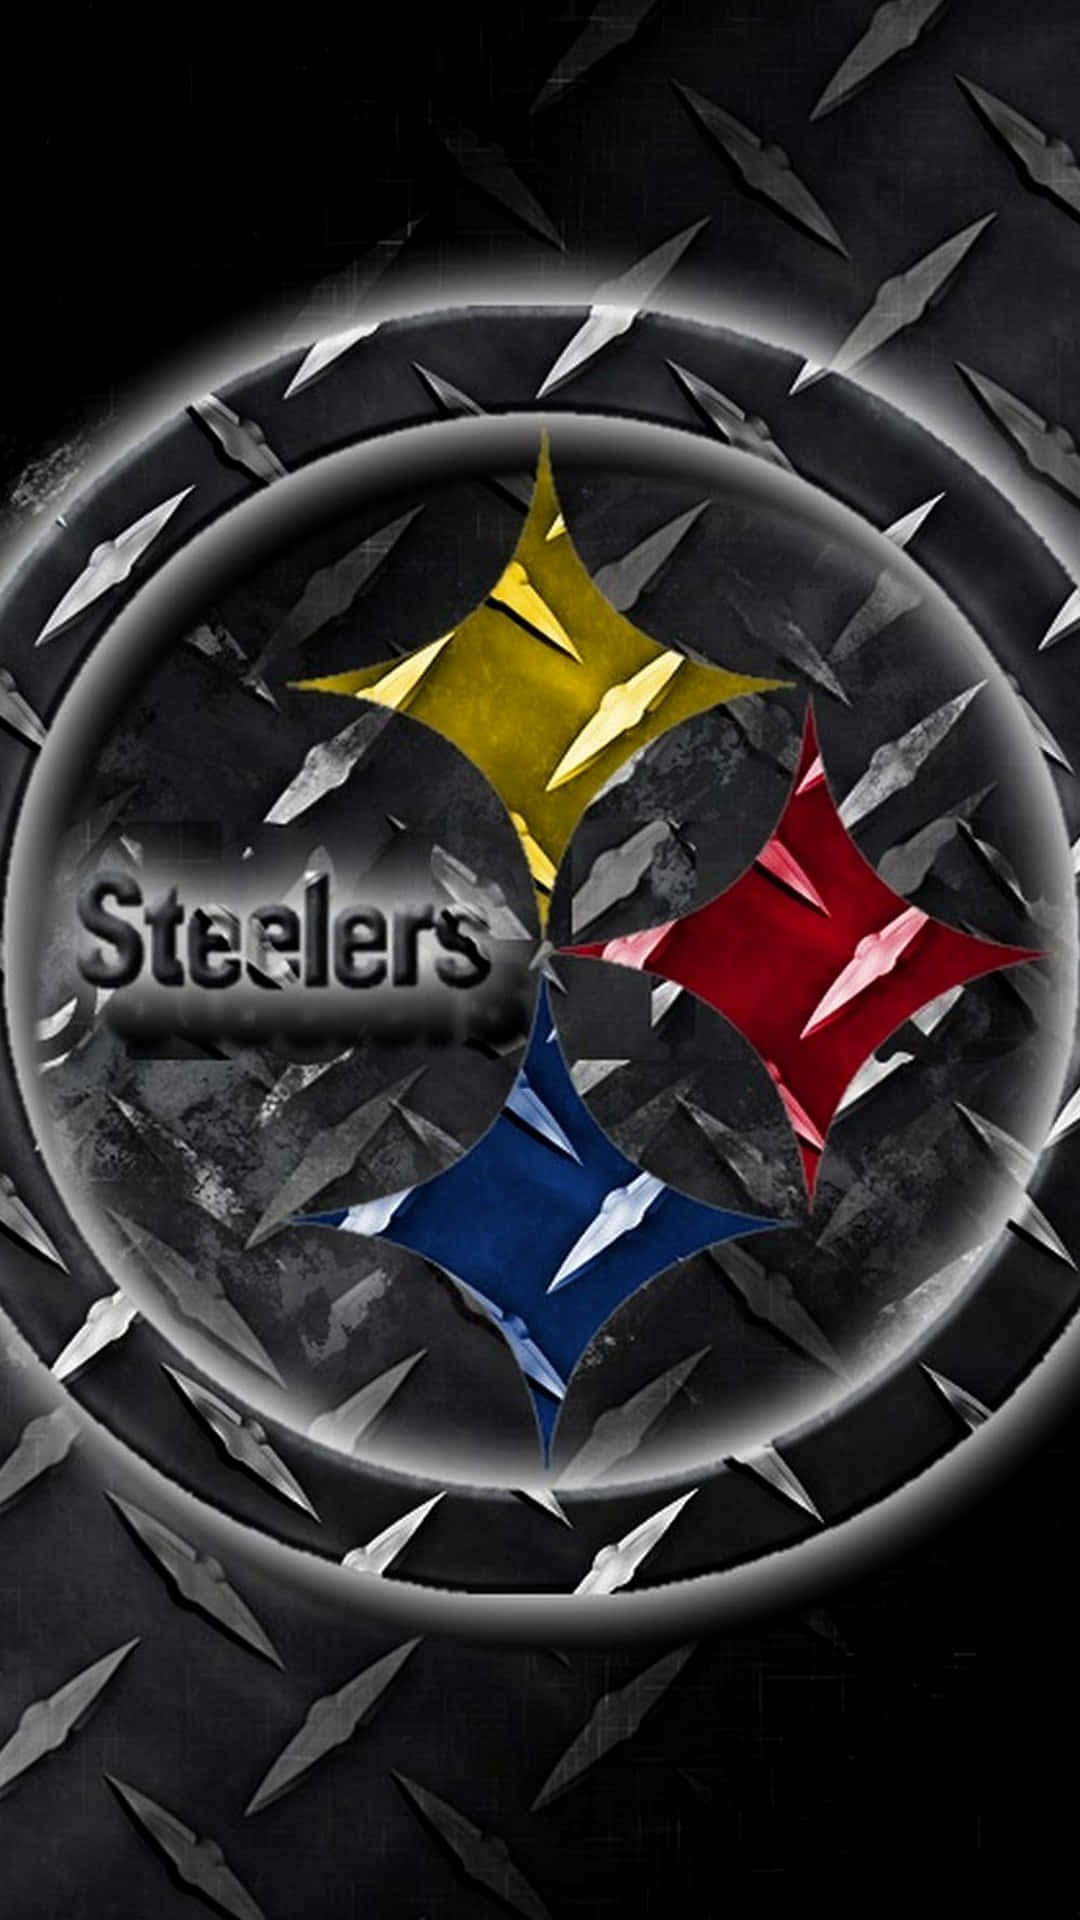 An iPhone featuring the colors and logo of the Pittsburgh Steelers football team Wallpaper